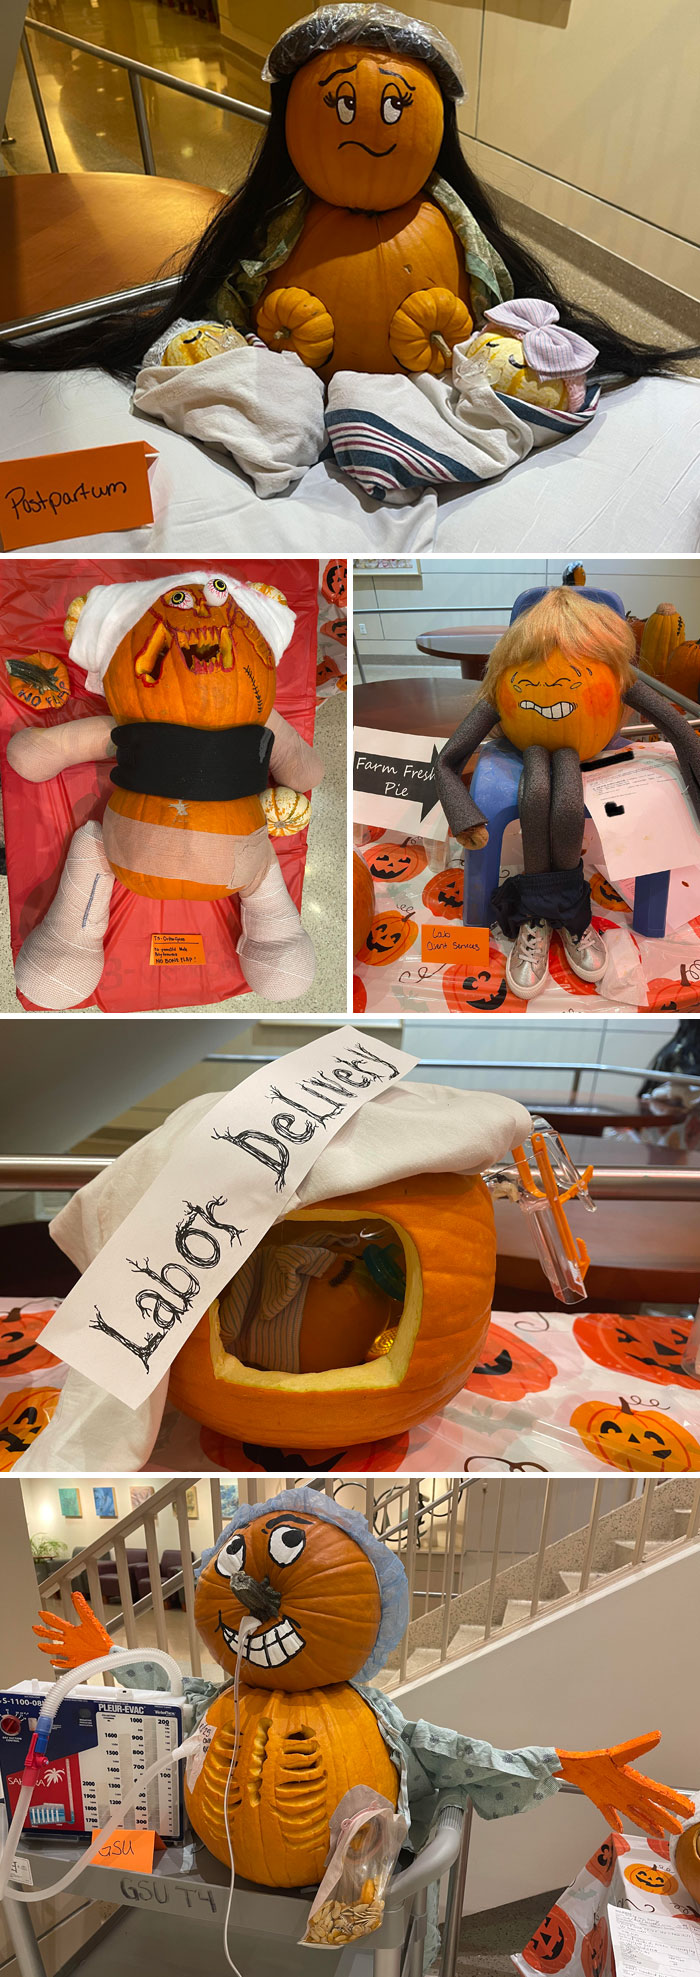 Some Of The Floors Had A Pumpkin Carving Contest